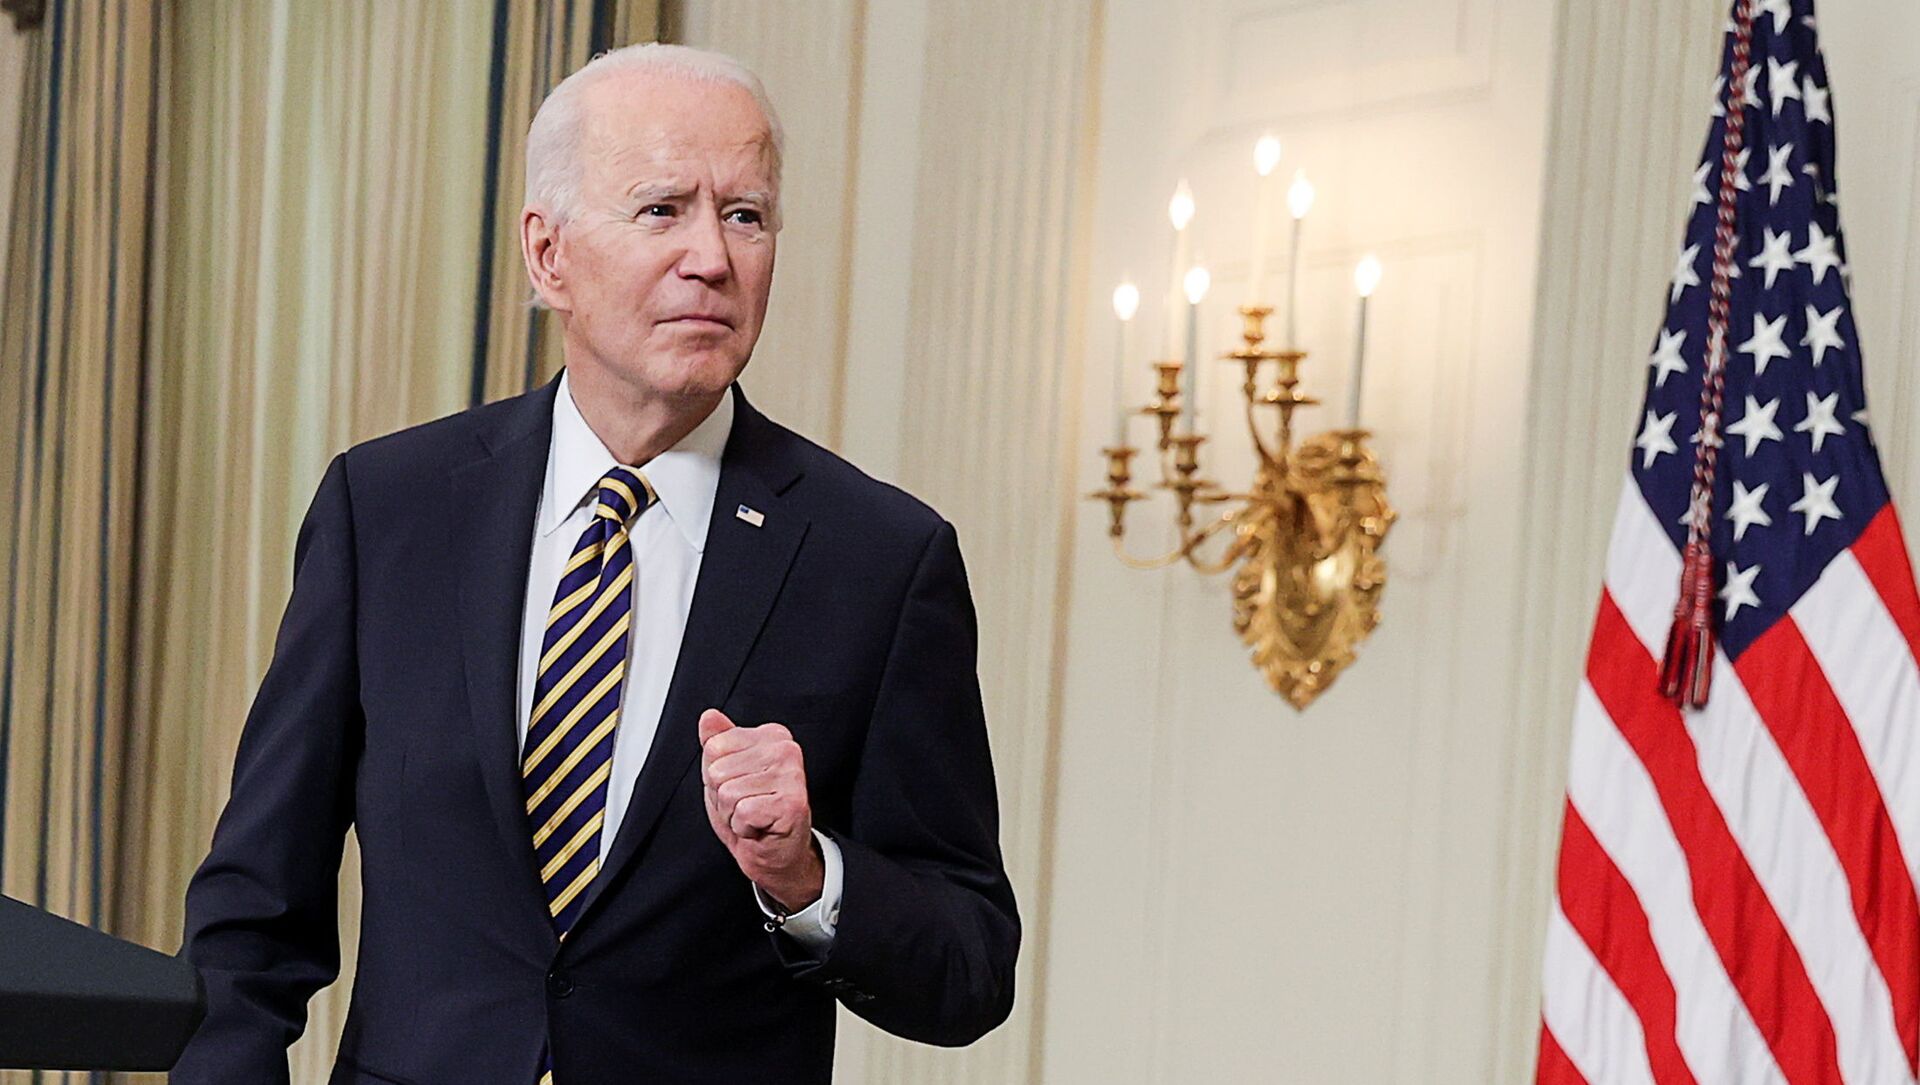 U.S. President Joe Biden listens to a question after delivering remarks and prior to signing an executive order, aimed at addressing a global semiconductor chip shortage, in the State Dining Room at the White House in Washington, U.S., February 24, 2021 - Sputnik International, 1920, 25.02.2021